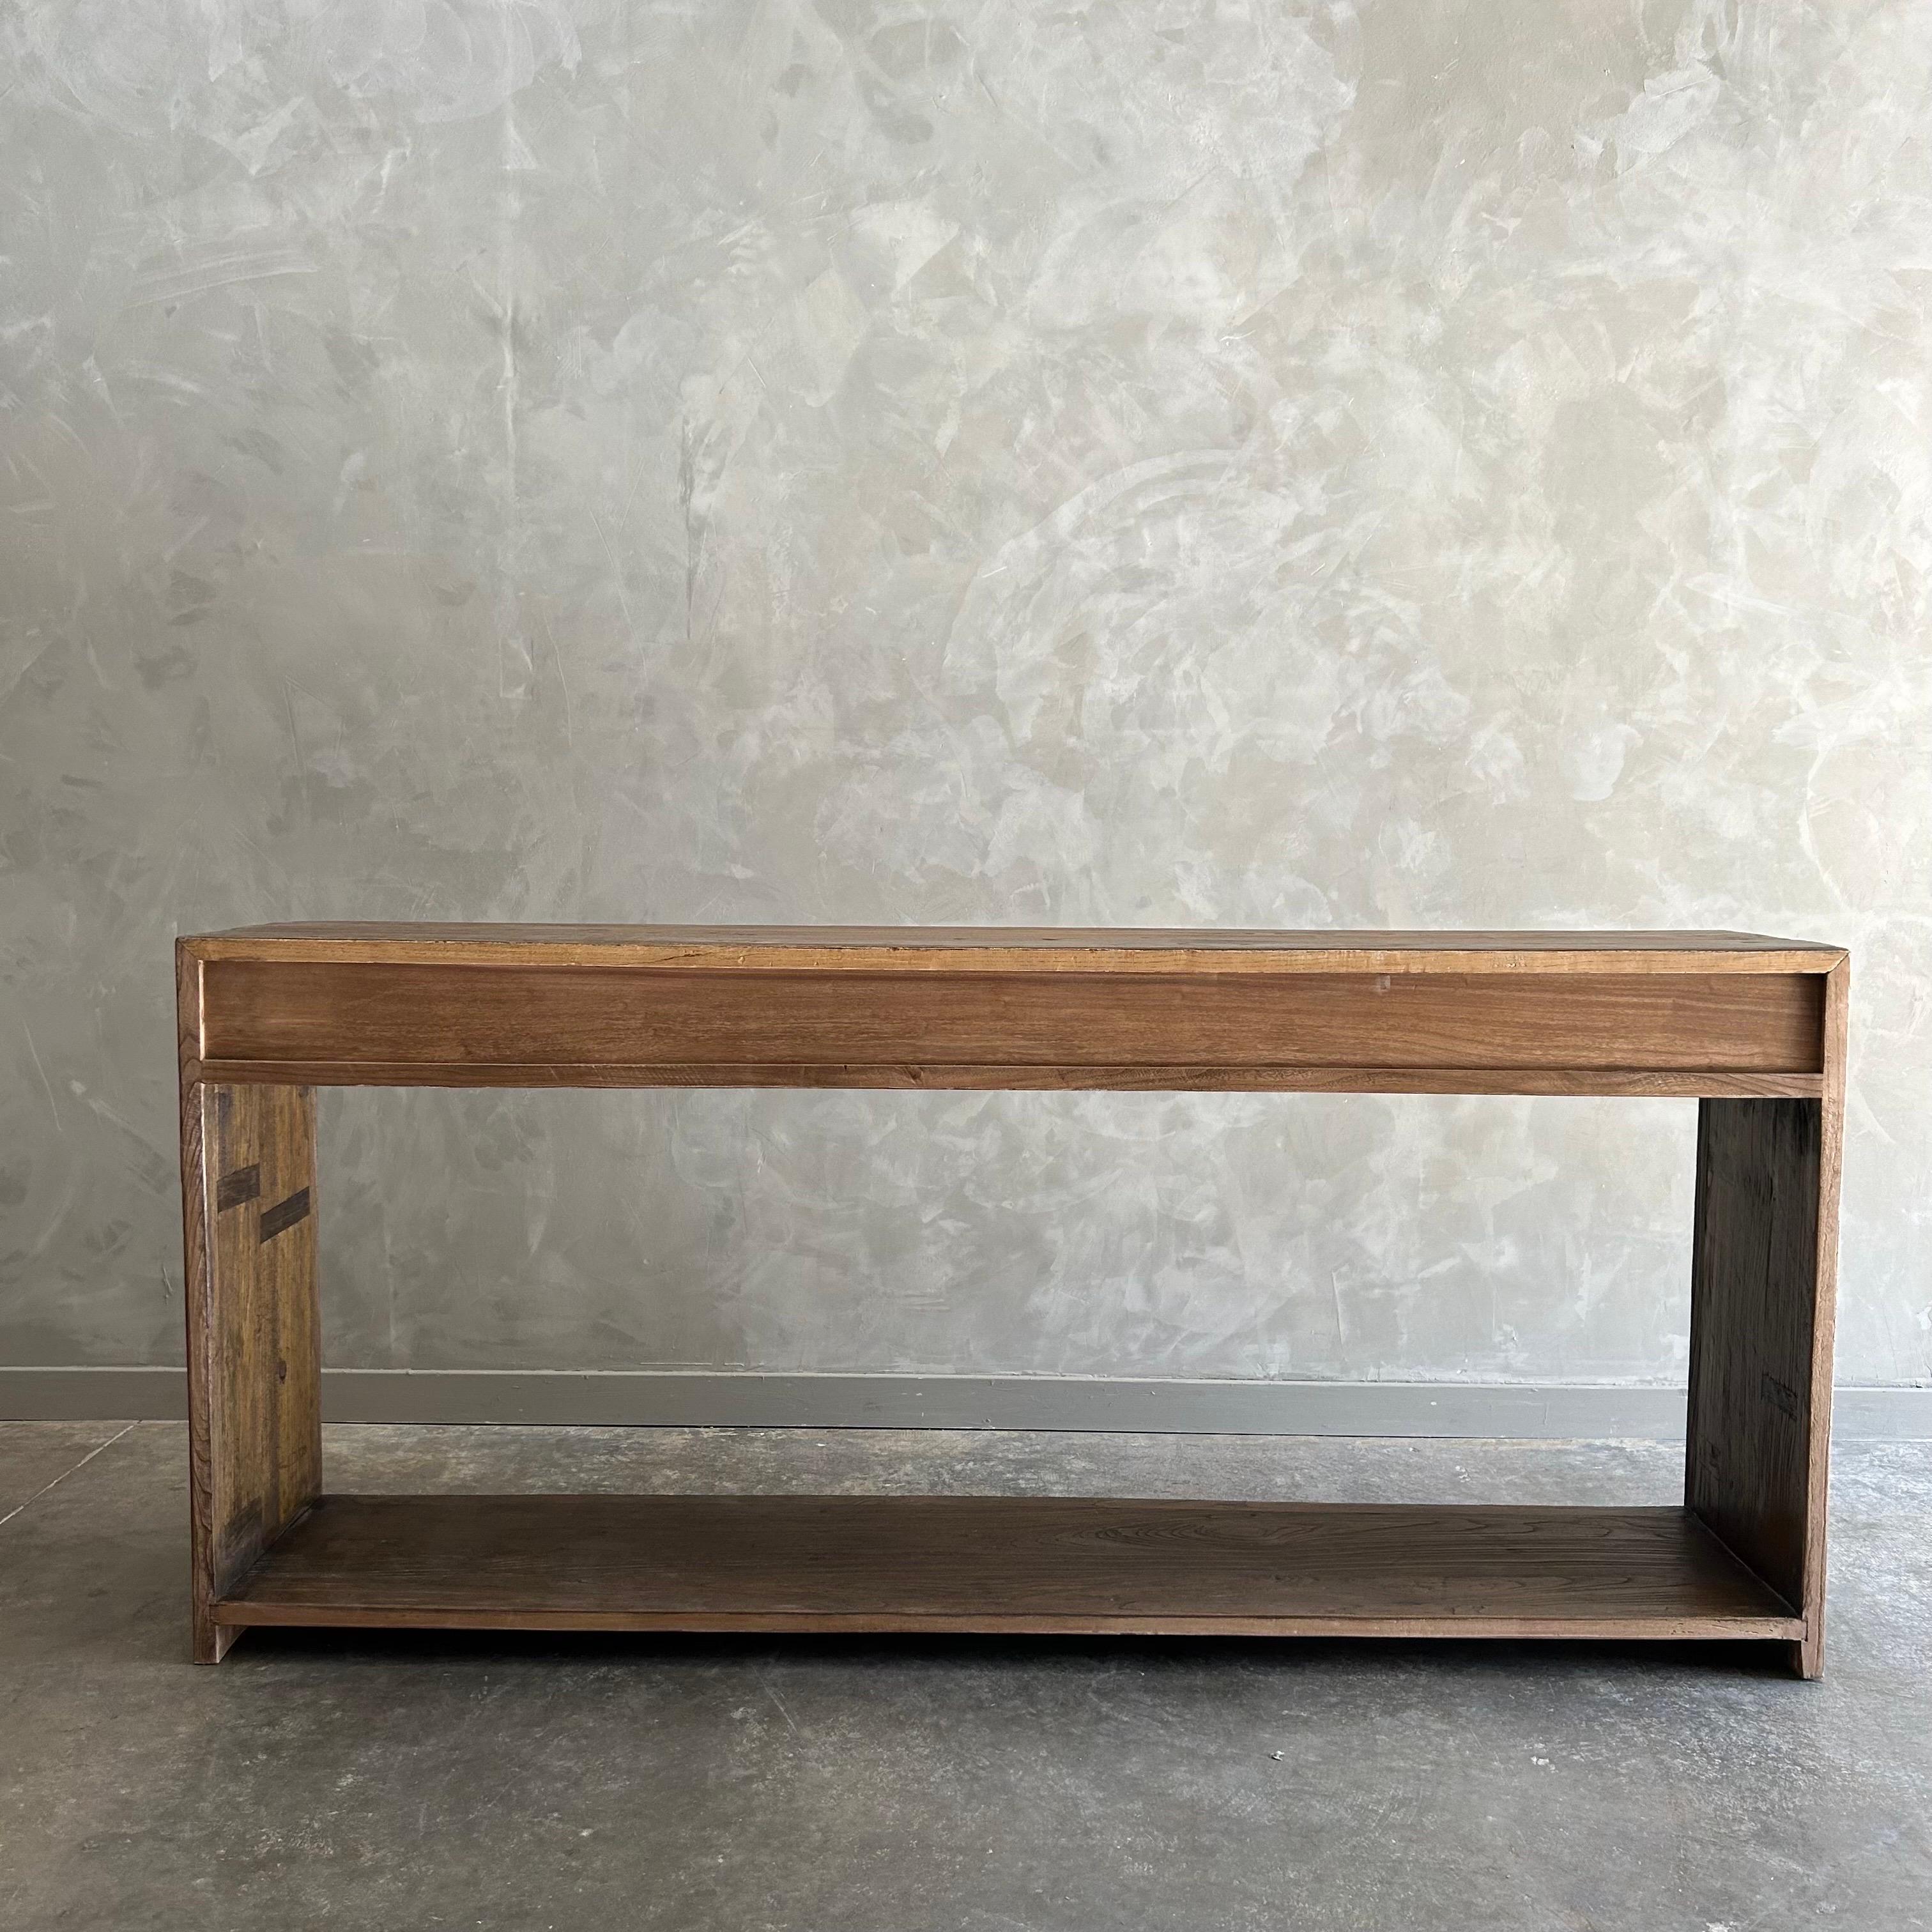 Custom Elm Wood Modern Console Table with Drawers in Dark Walnut For Sale 7